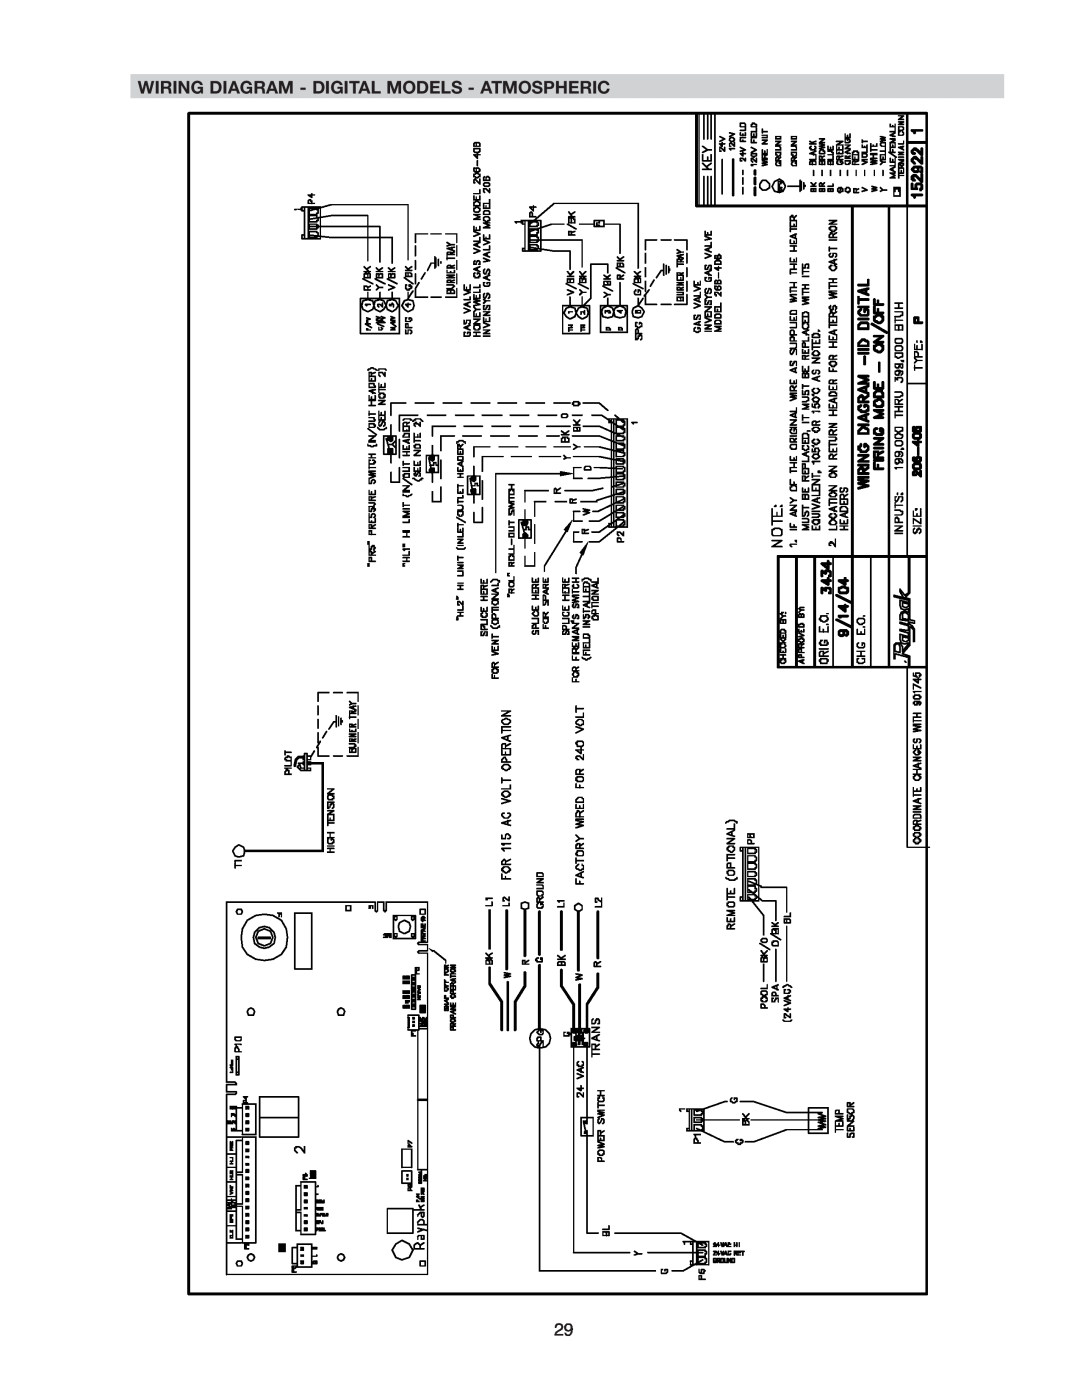 Raypak 207A, 406A, 206A, 407A, 337A, 336A, 267A, 266A operating instructions Wiring Diagram - Digital Models - Atmospheric 